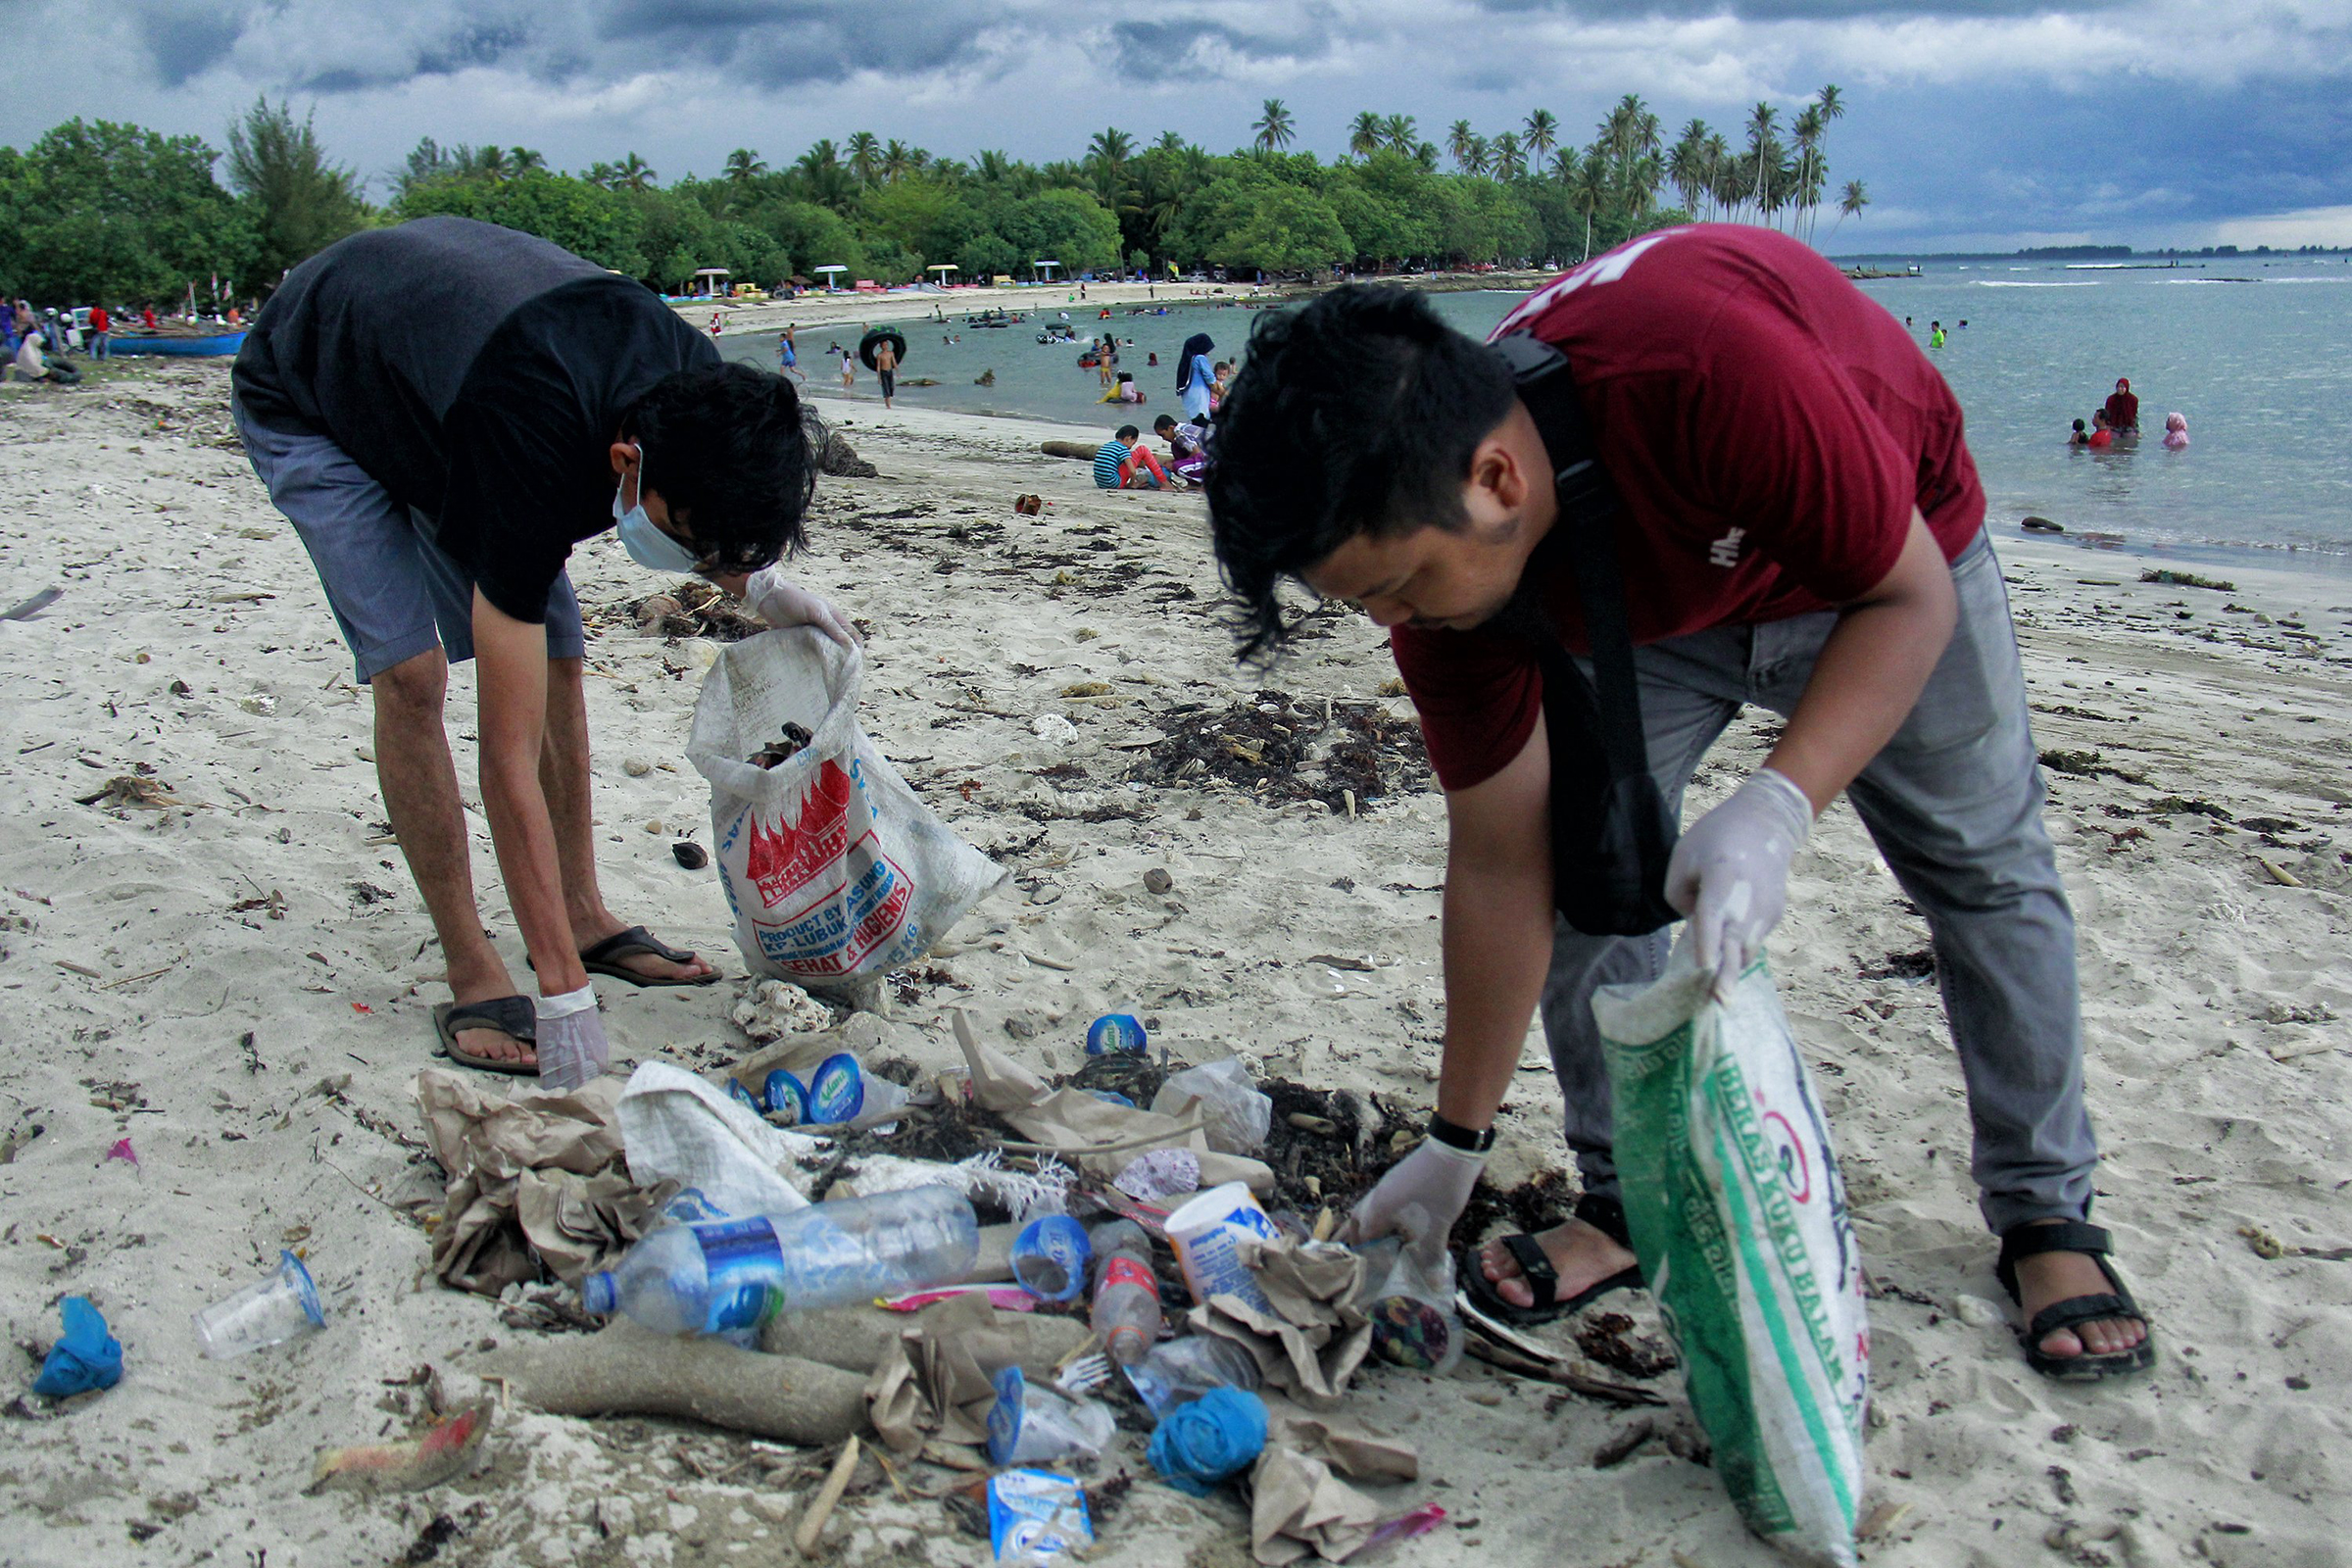 Students from the Environmental Care Movement (GPL) clean up rubbish on the Coastal Tourism Area of Lhok Bubon, in Indonesia on Aug.18, 2019. (Nurul Fahmi—SOPA Images/Sipa USA)